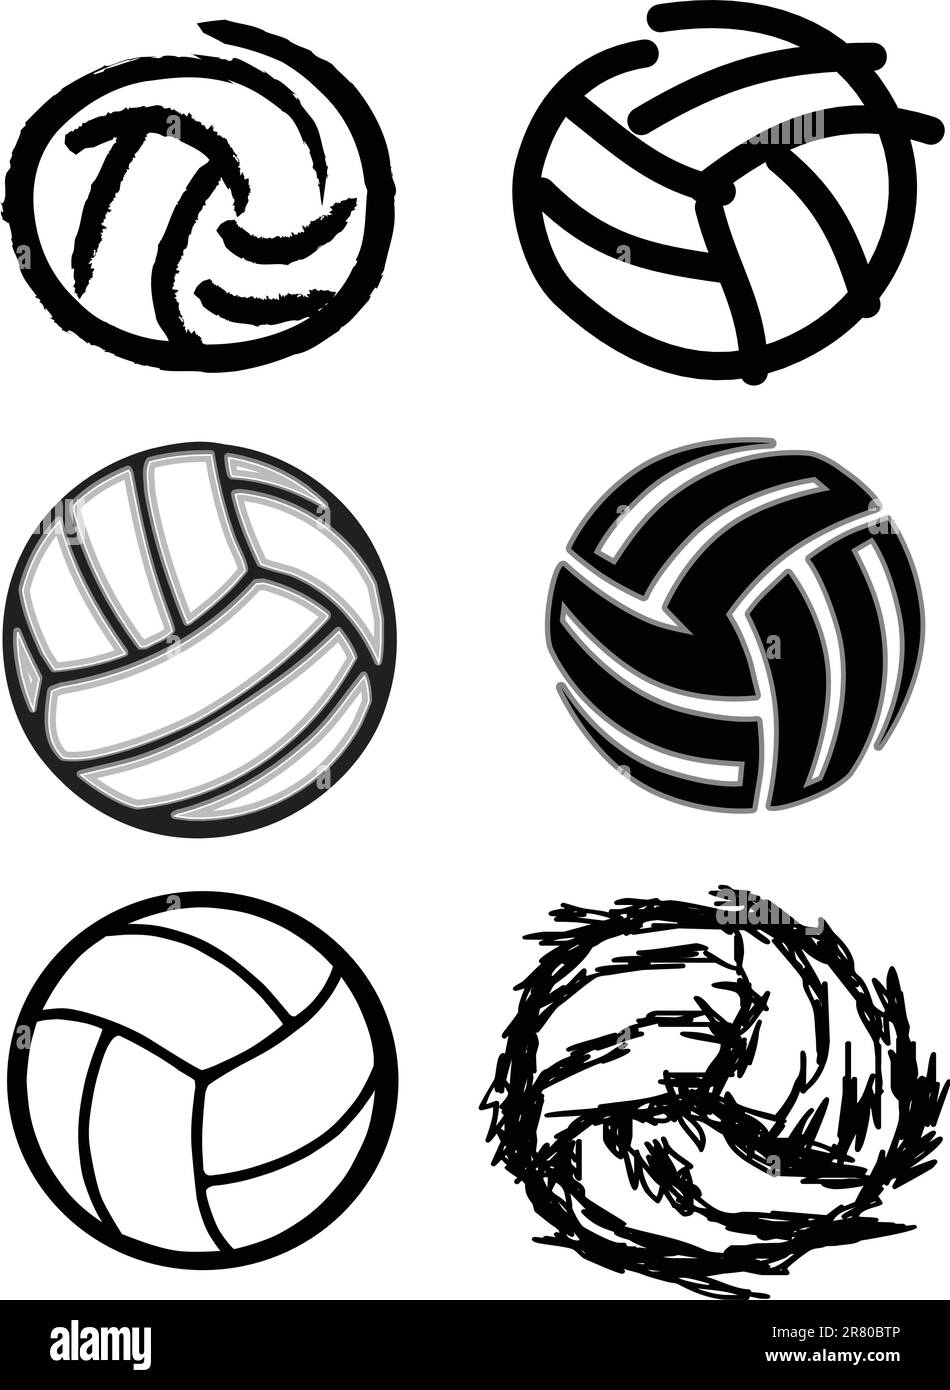 Vector Group of Six Volleyball Ball Illustrations Stock Vector